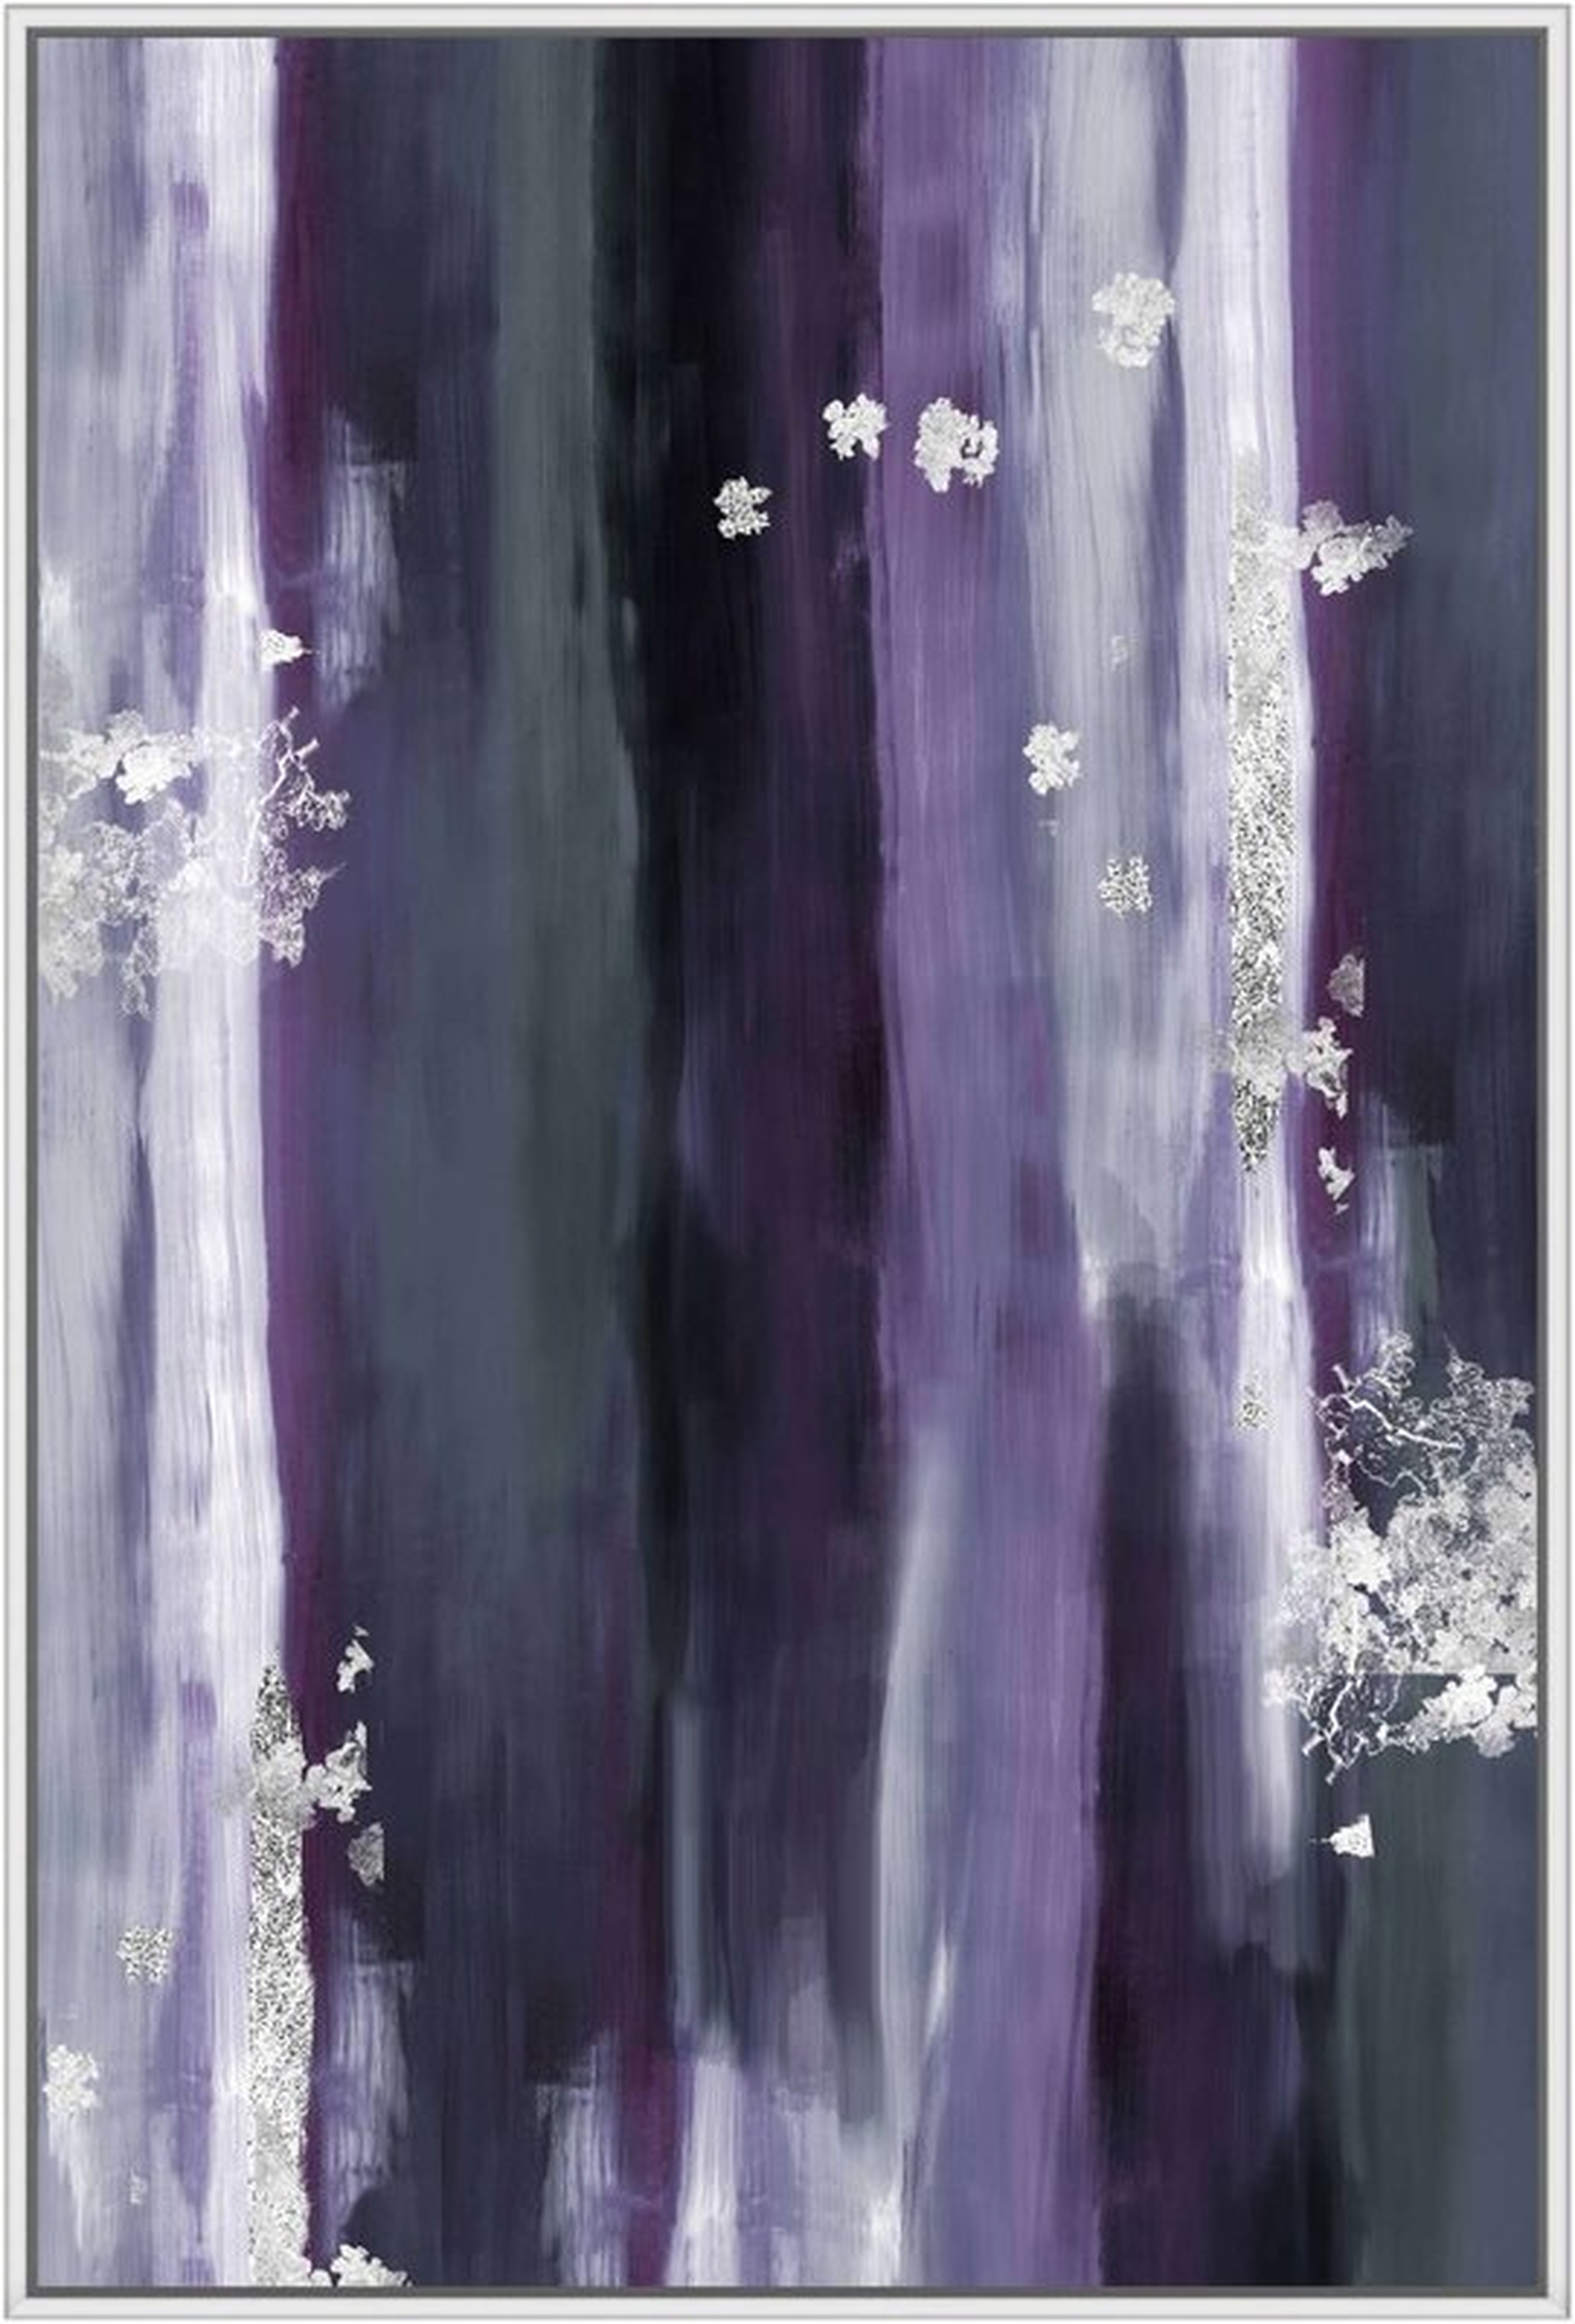 'VIOLETS SNOW' FRAMED GRAPHIC ART PRINT ON CANVAS - Perigold